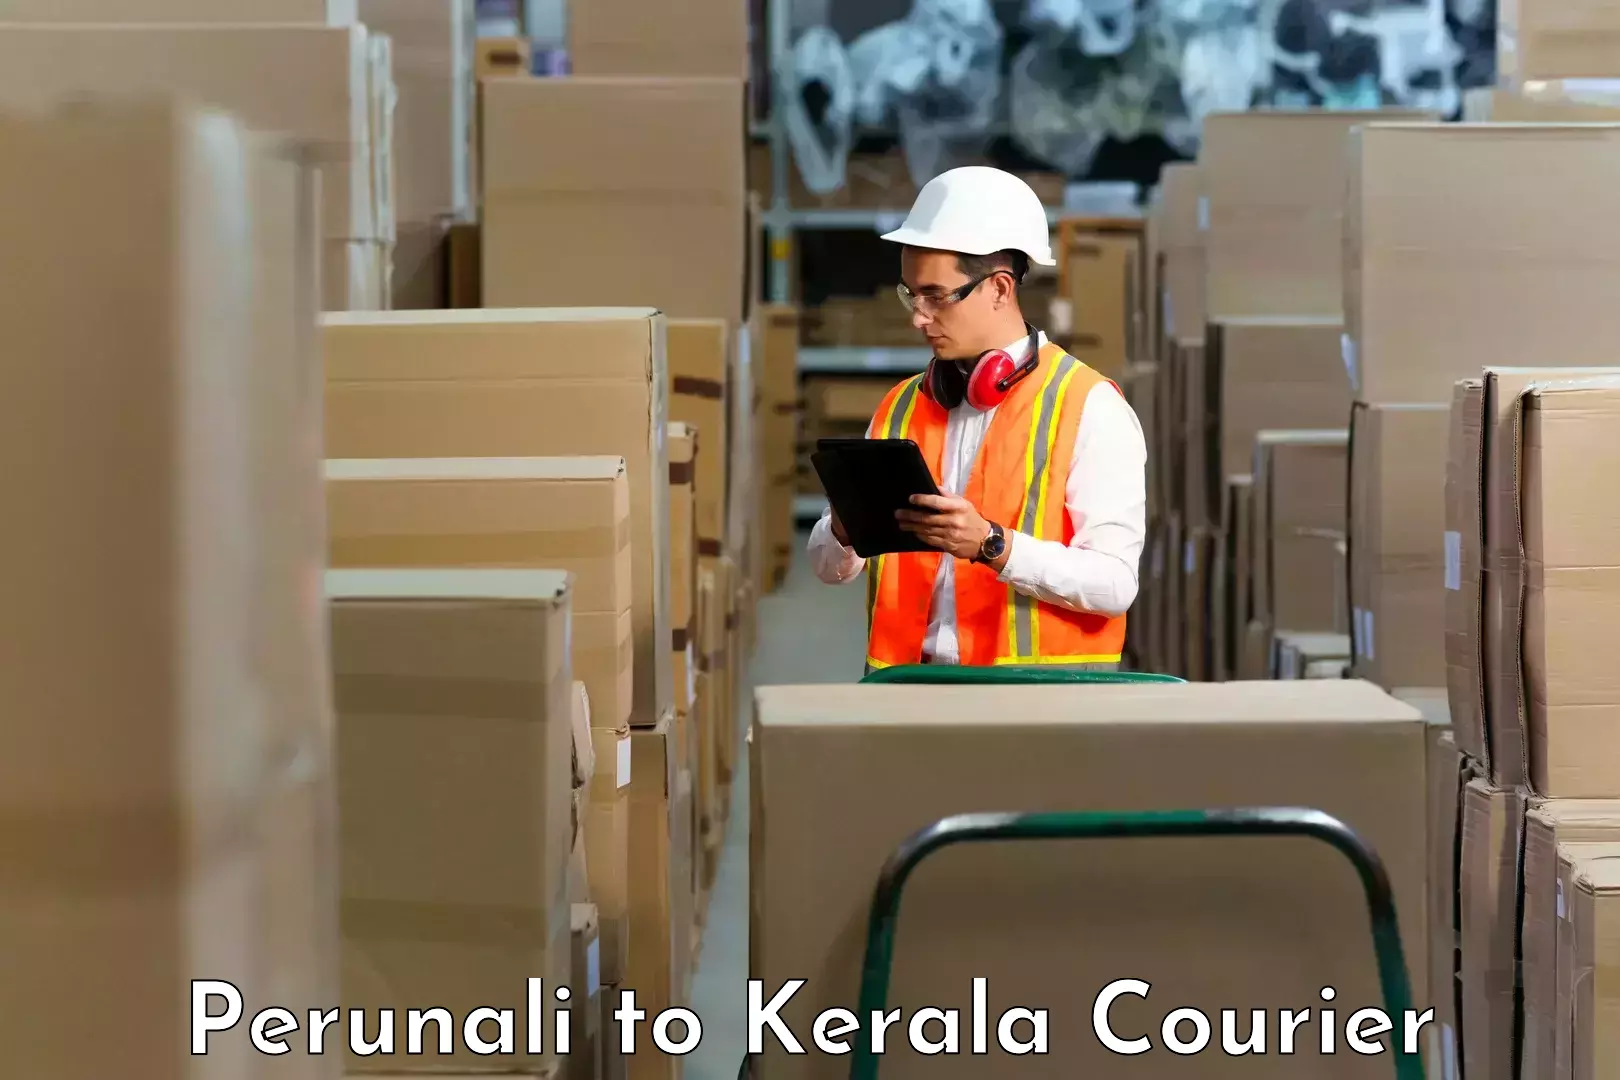 Global courier networks Perunali to Kerala